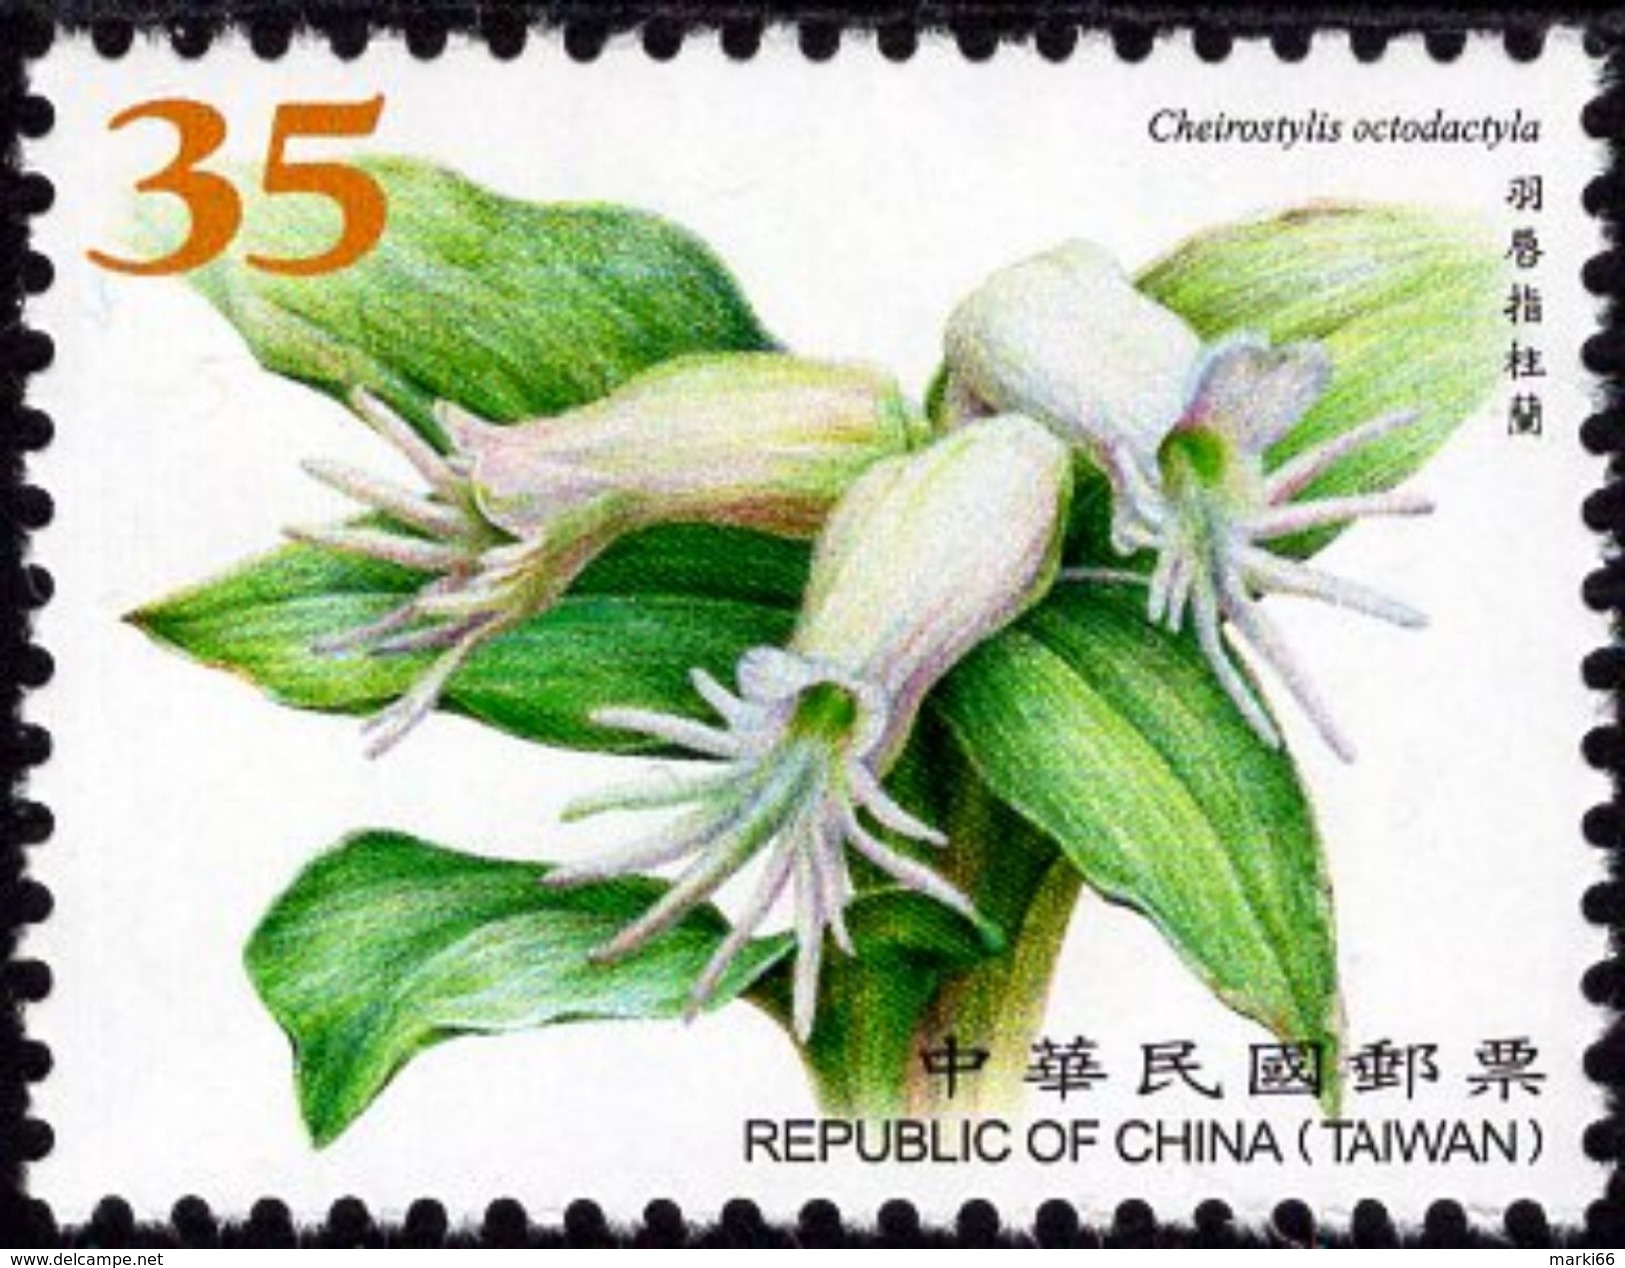 Taiwan - 2017 - Wild Orchids Of Taiwan - Cheirostylis Octodactyla - Mint Stamp - Unused Stamps